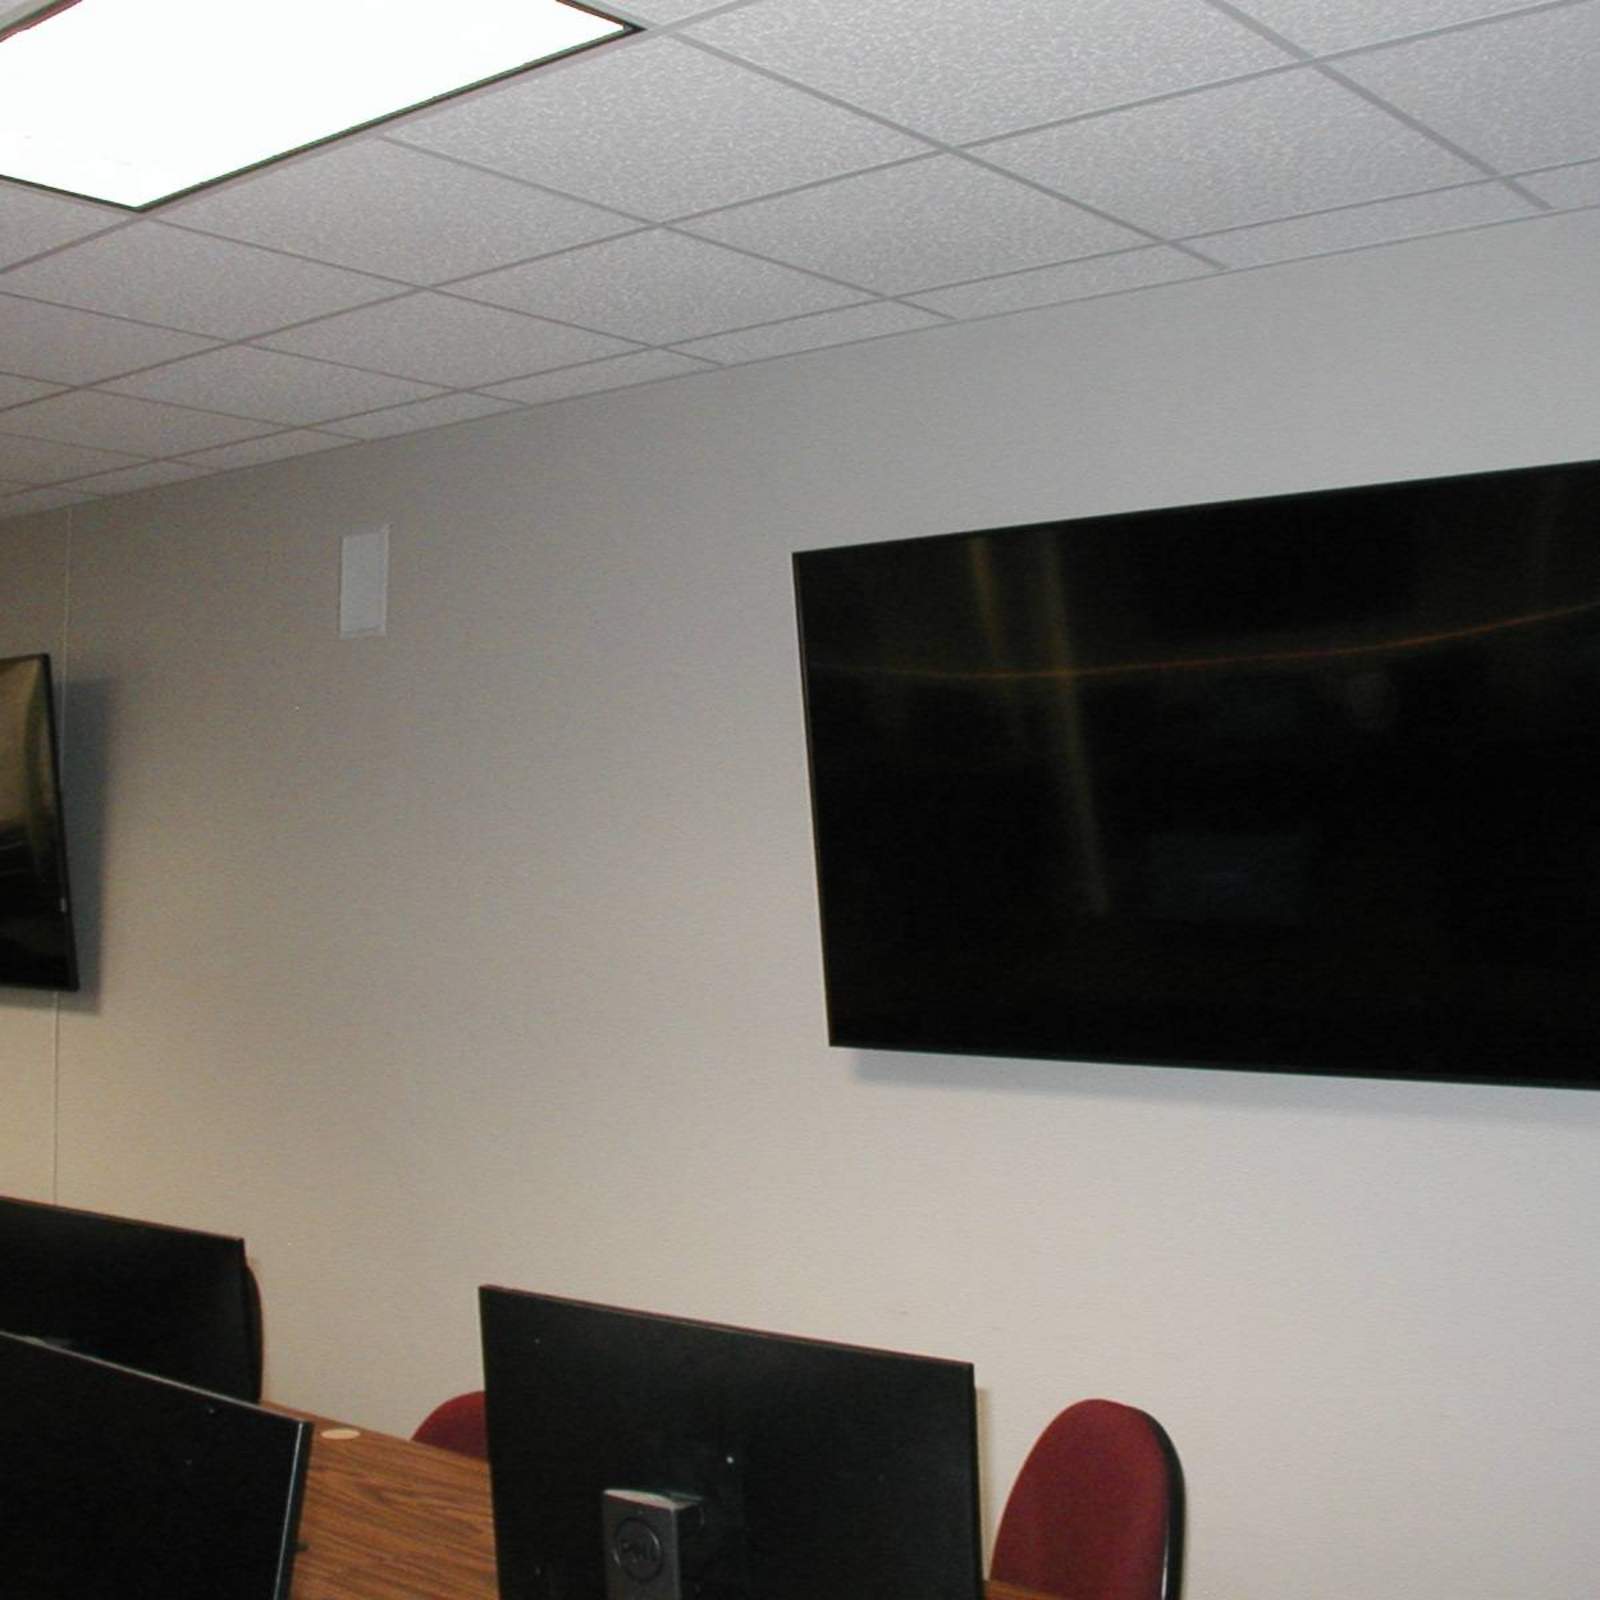 72 inch monitors on walls in classroom.